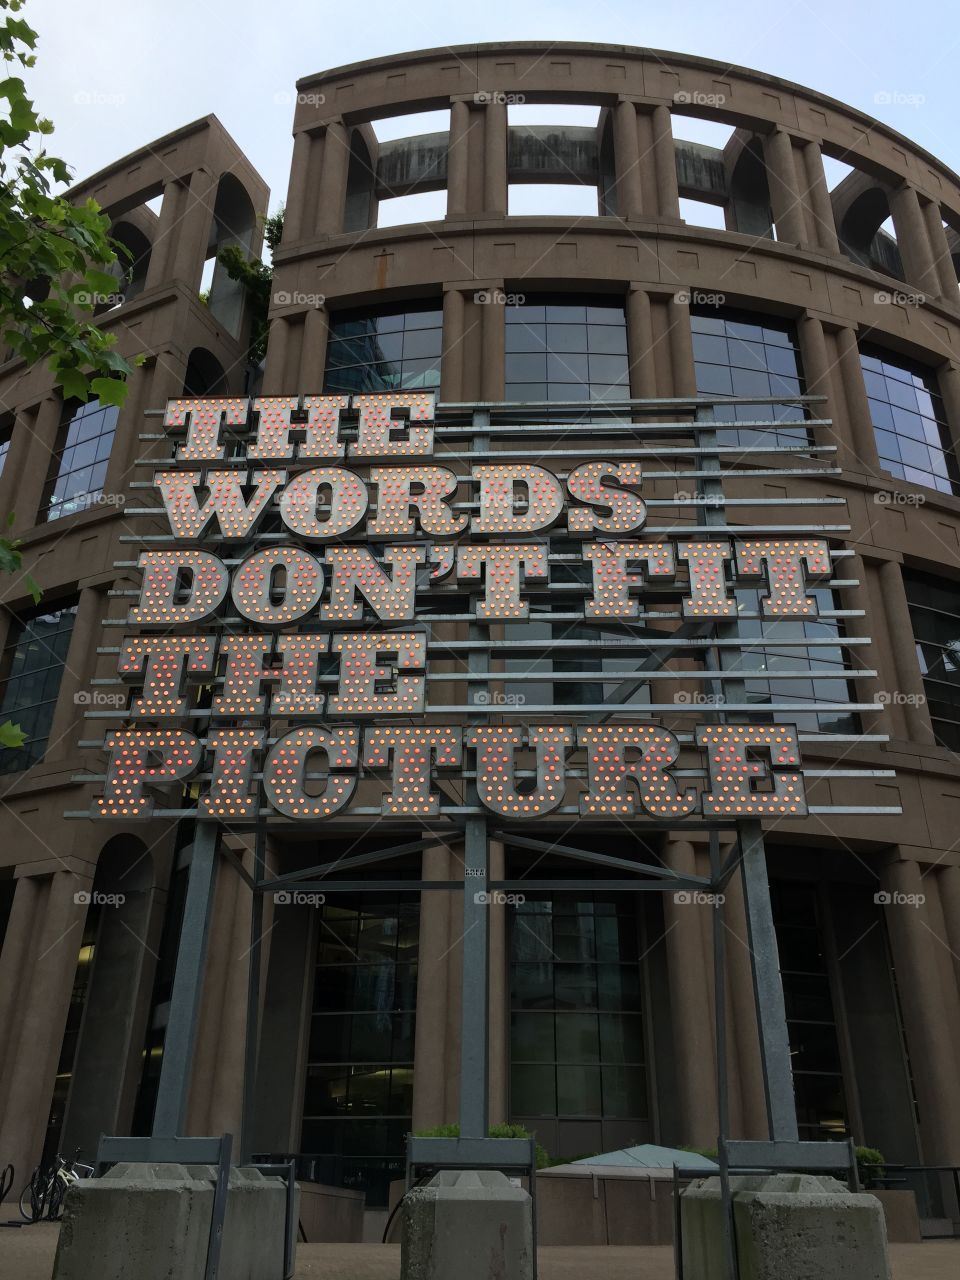 The Words Don't Fit The Picture. "The words don't fit the picture" in front of the Vancouver Public Library